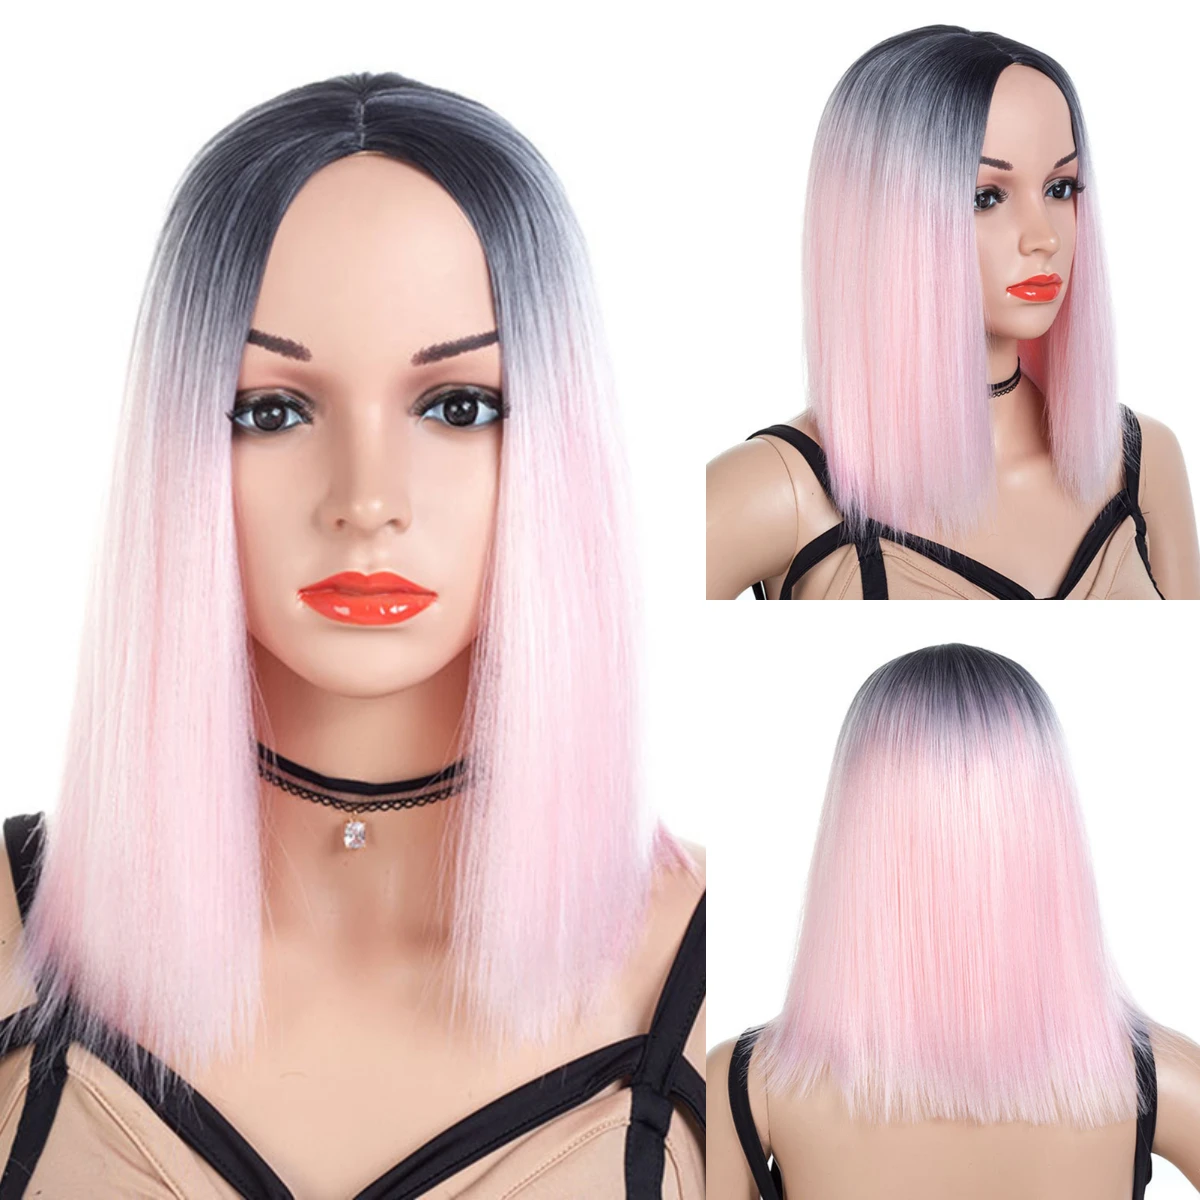 

HANEROU Women Bob Short Synthetic Wigs Middle Line Straight Two Tone Color Black Mixed Pink Cosplay Wig